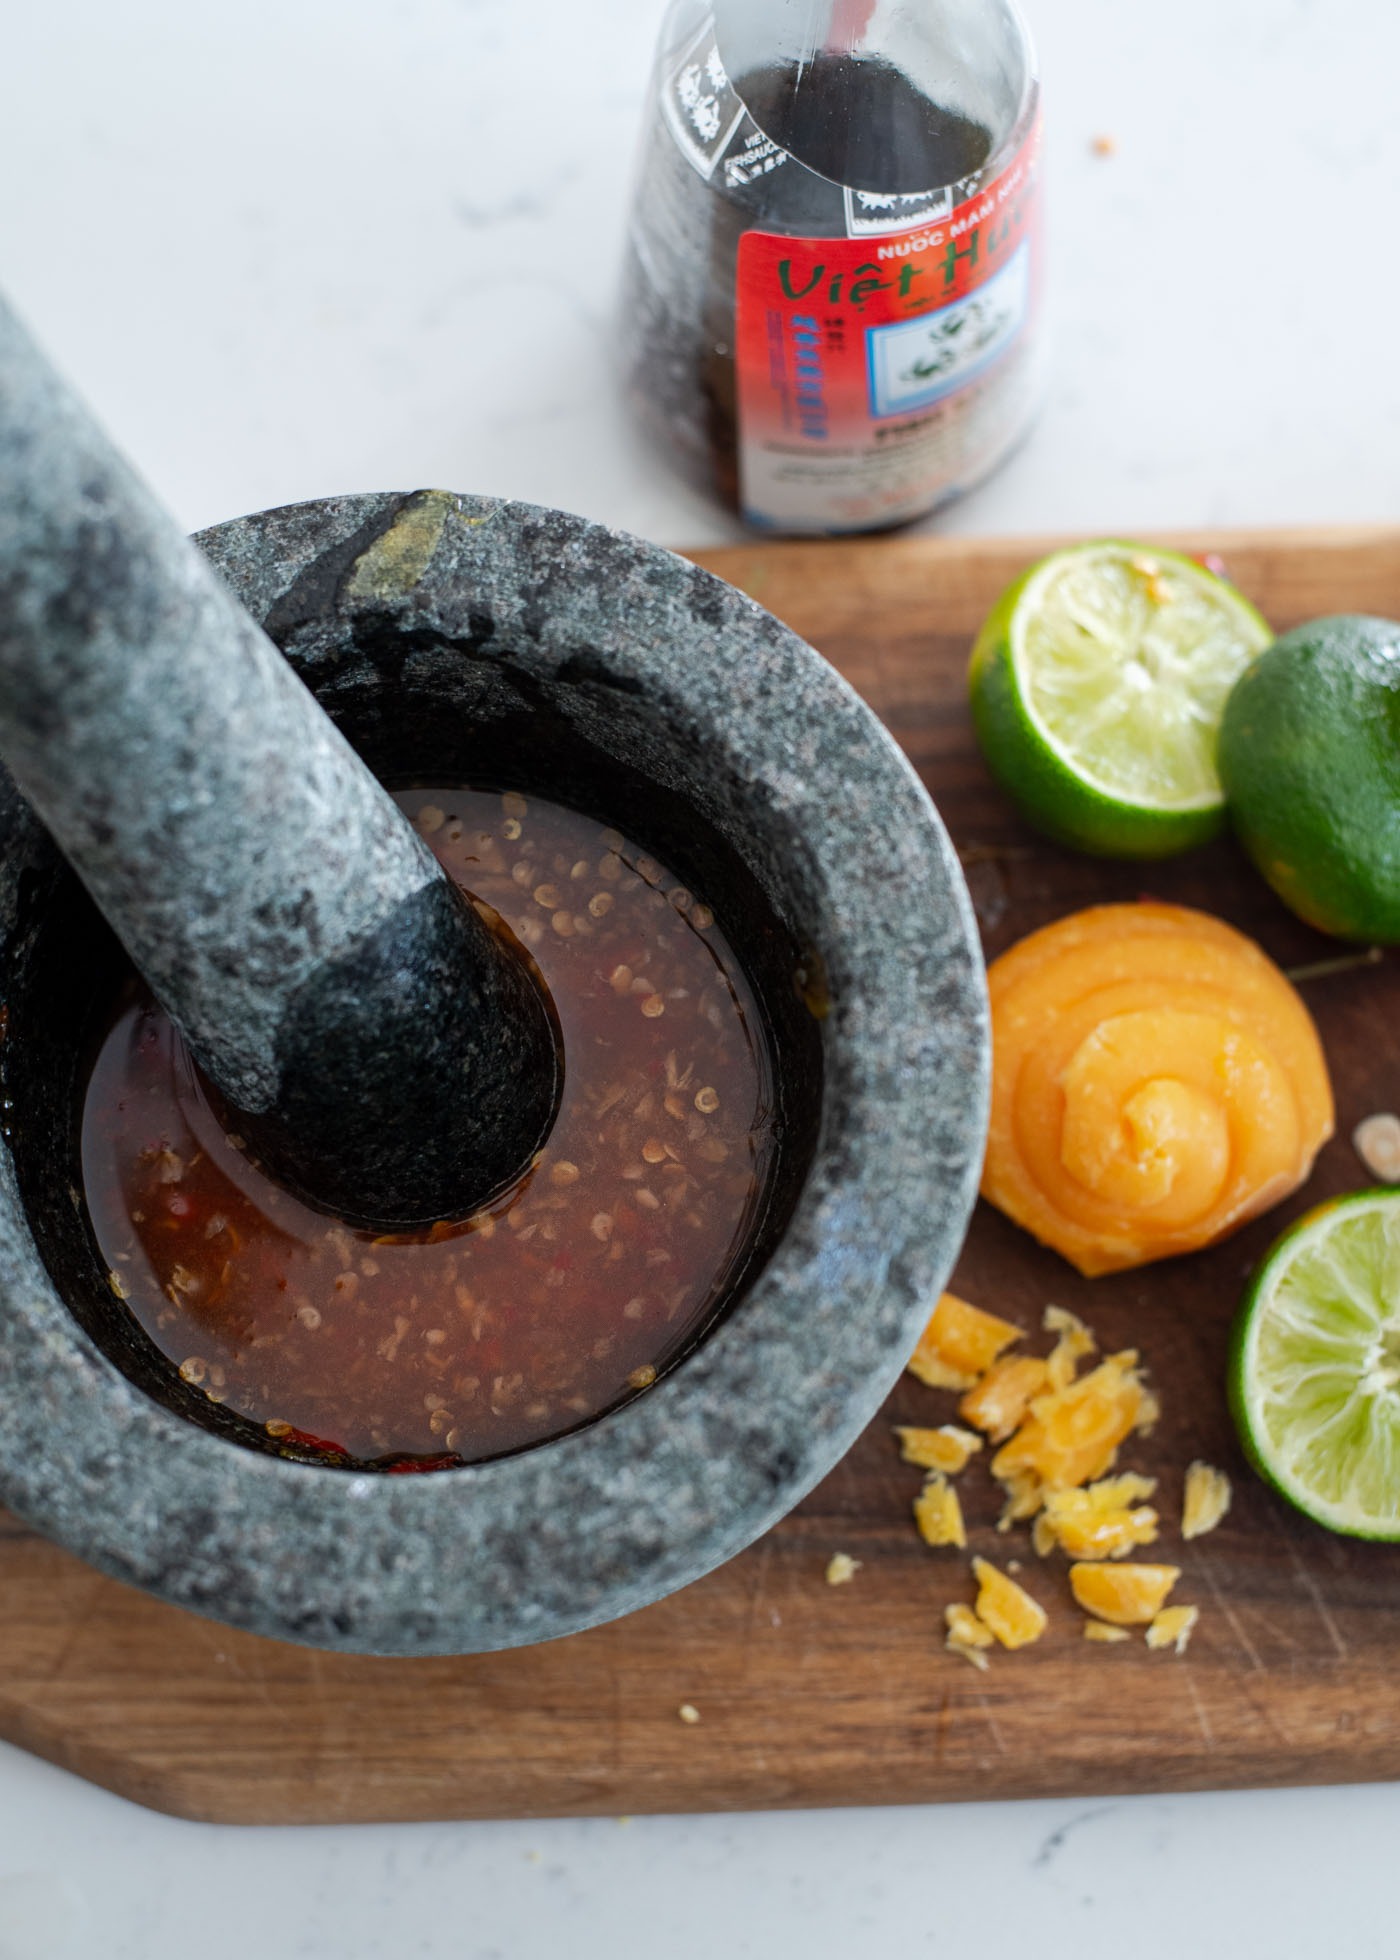 Thai fish sauce dressing is made in a mortar with palm sugar and lime.